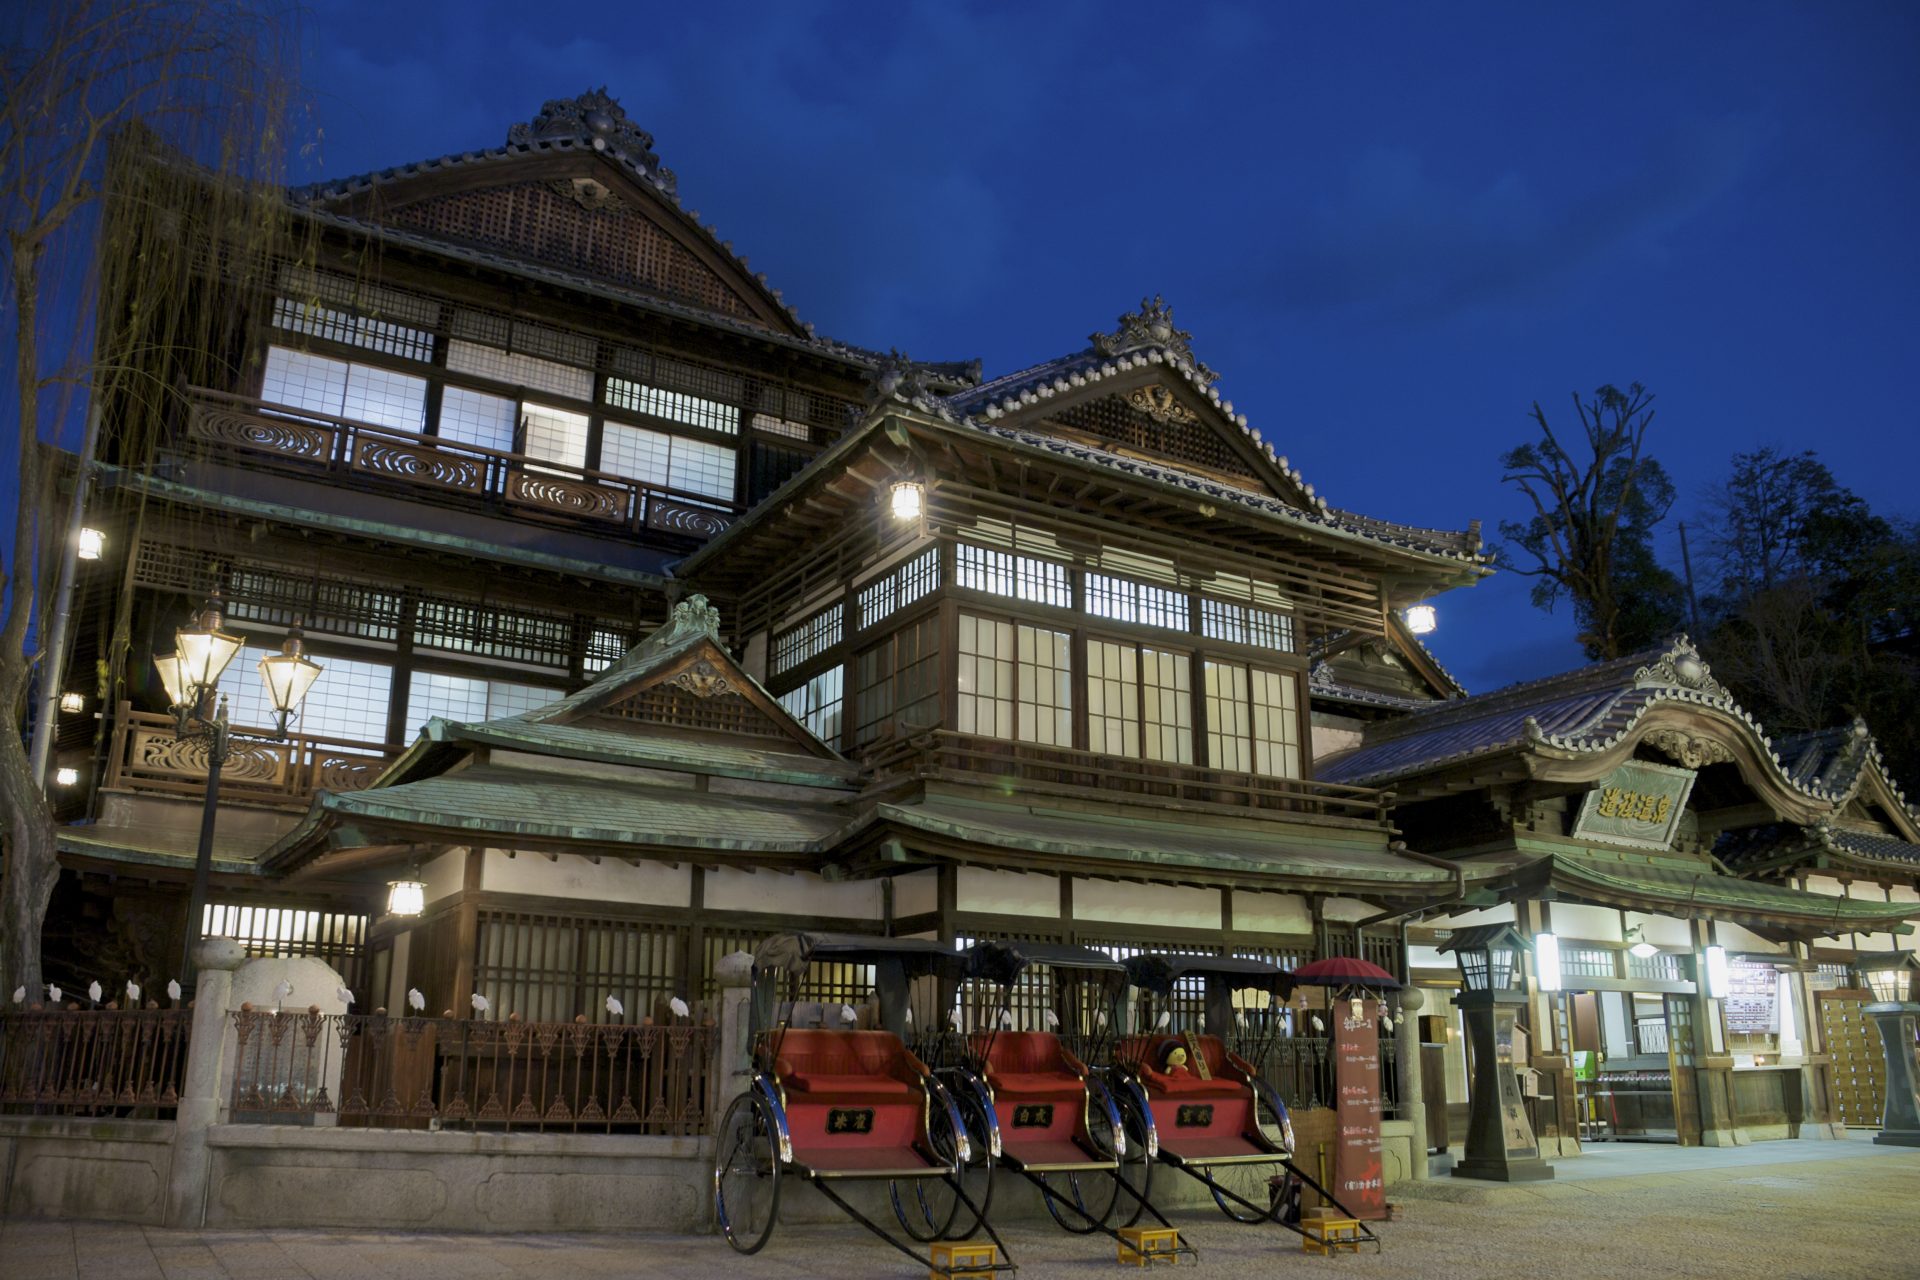 <p>Dogo Onsen in Matsuyama City boasts a history of over 3,000 years. It appears in the Nihon Shoki (Chronicles of Japan) and is considered one of Japan's three oldest hot springs. The water is a colorless and transparent alkaline simple spring that attracts the rich and famous as its guests.</p>